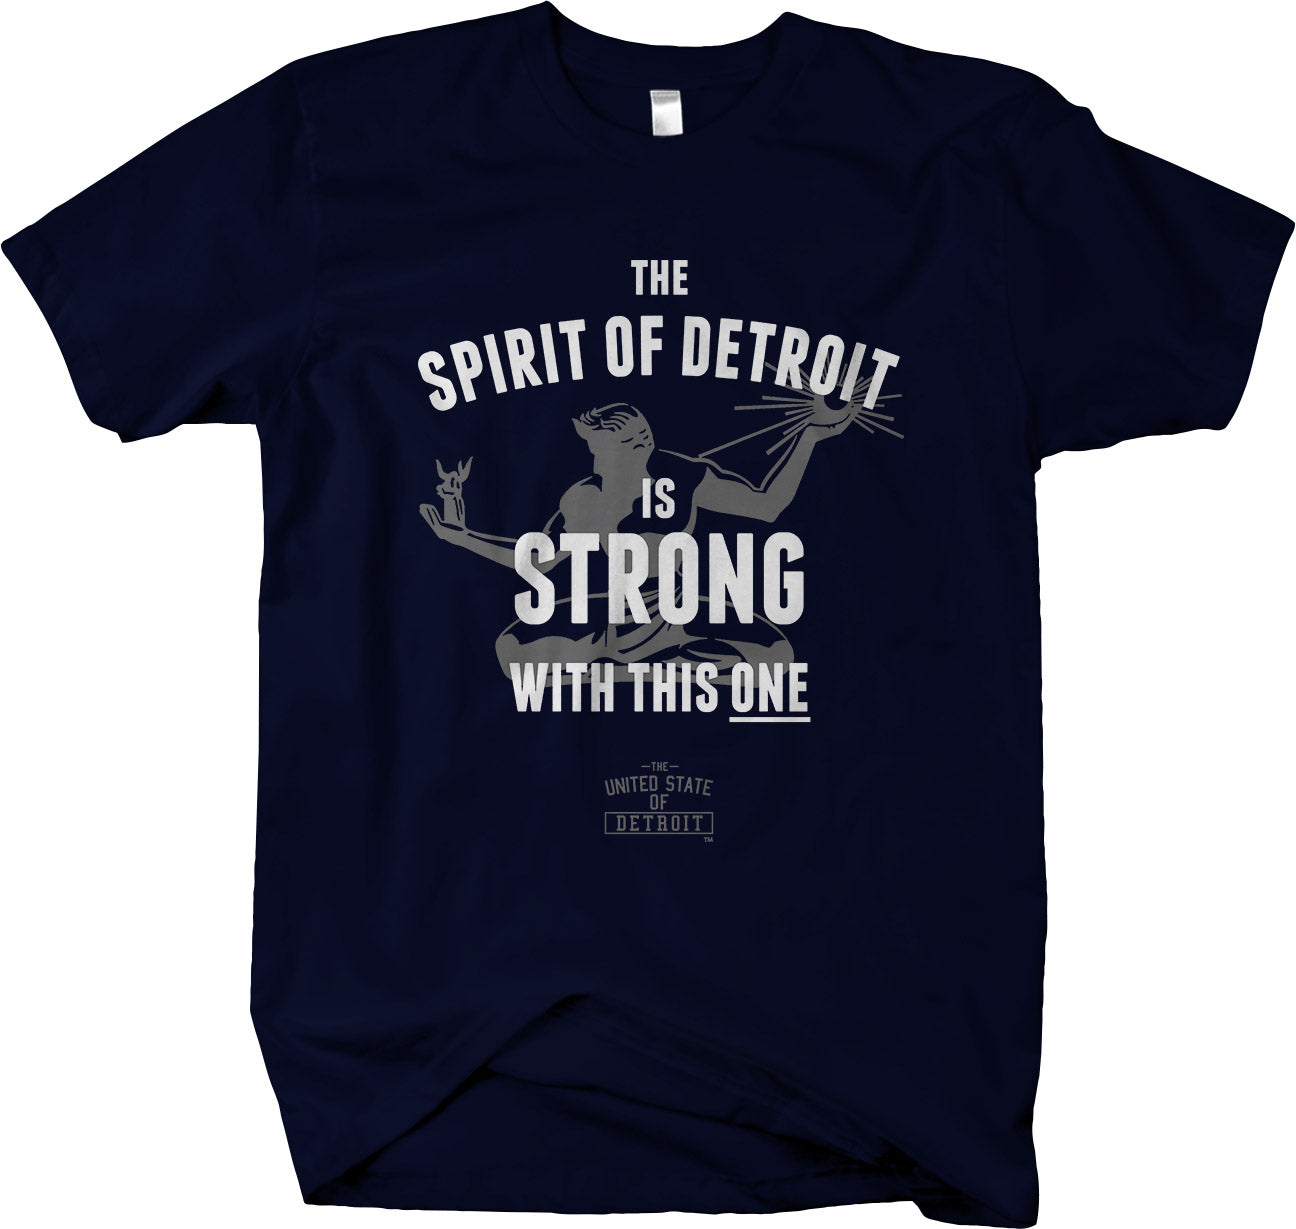 The Spirit of Detroit is Strong With This One - Detroit 313